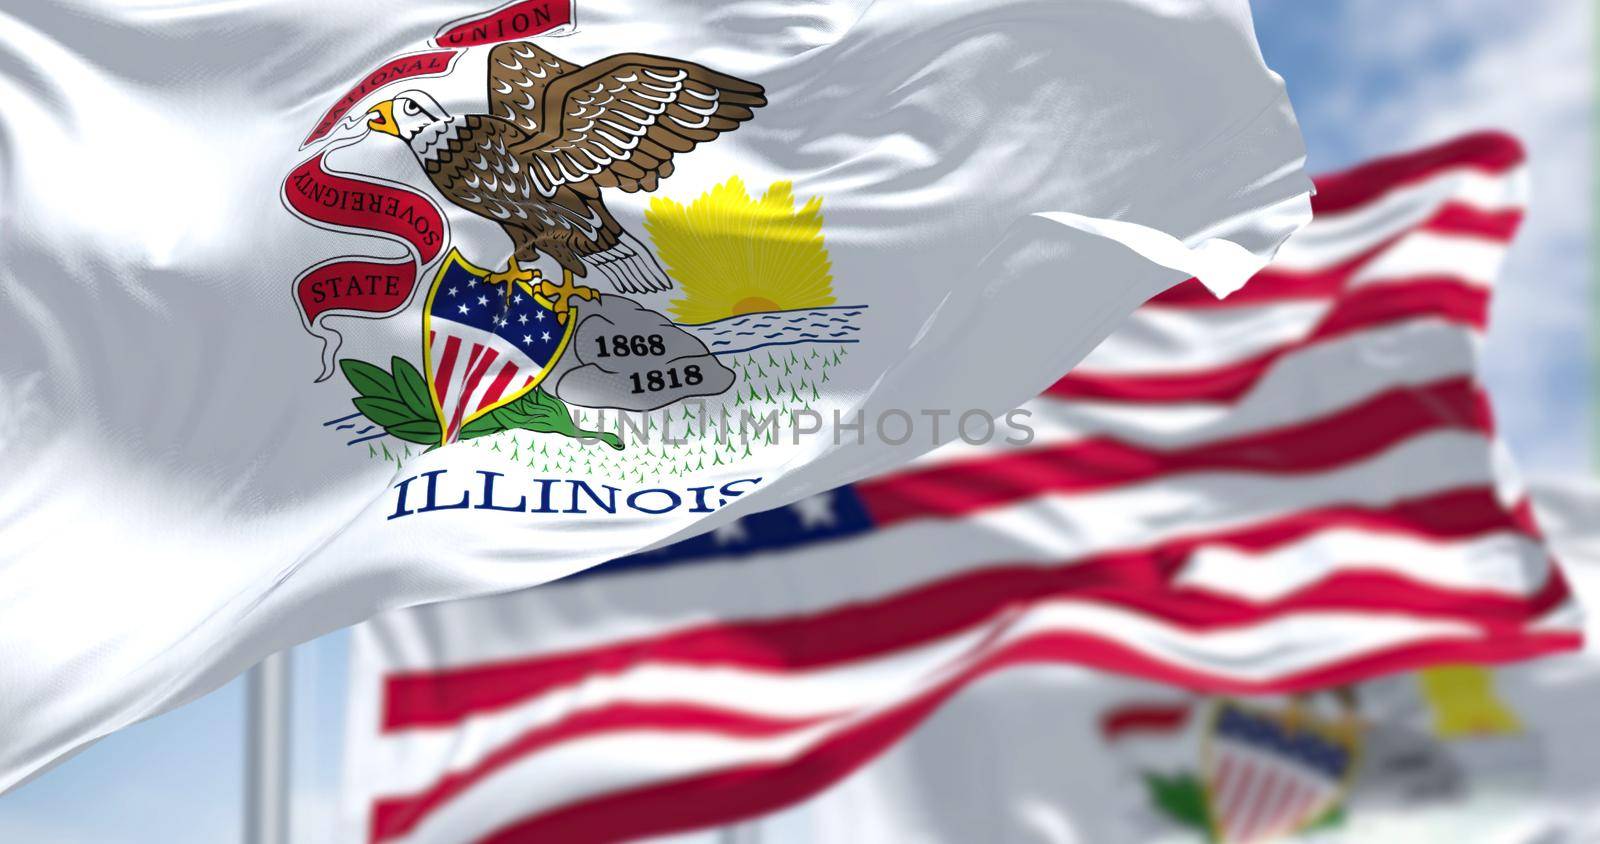 The Illinois state flag waving along with the national flag of the United States of America by rarrarorro